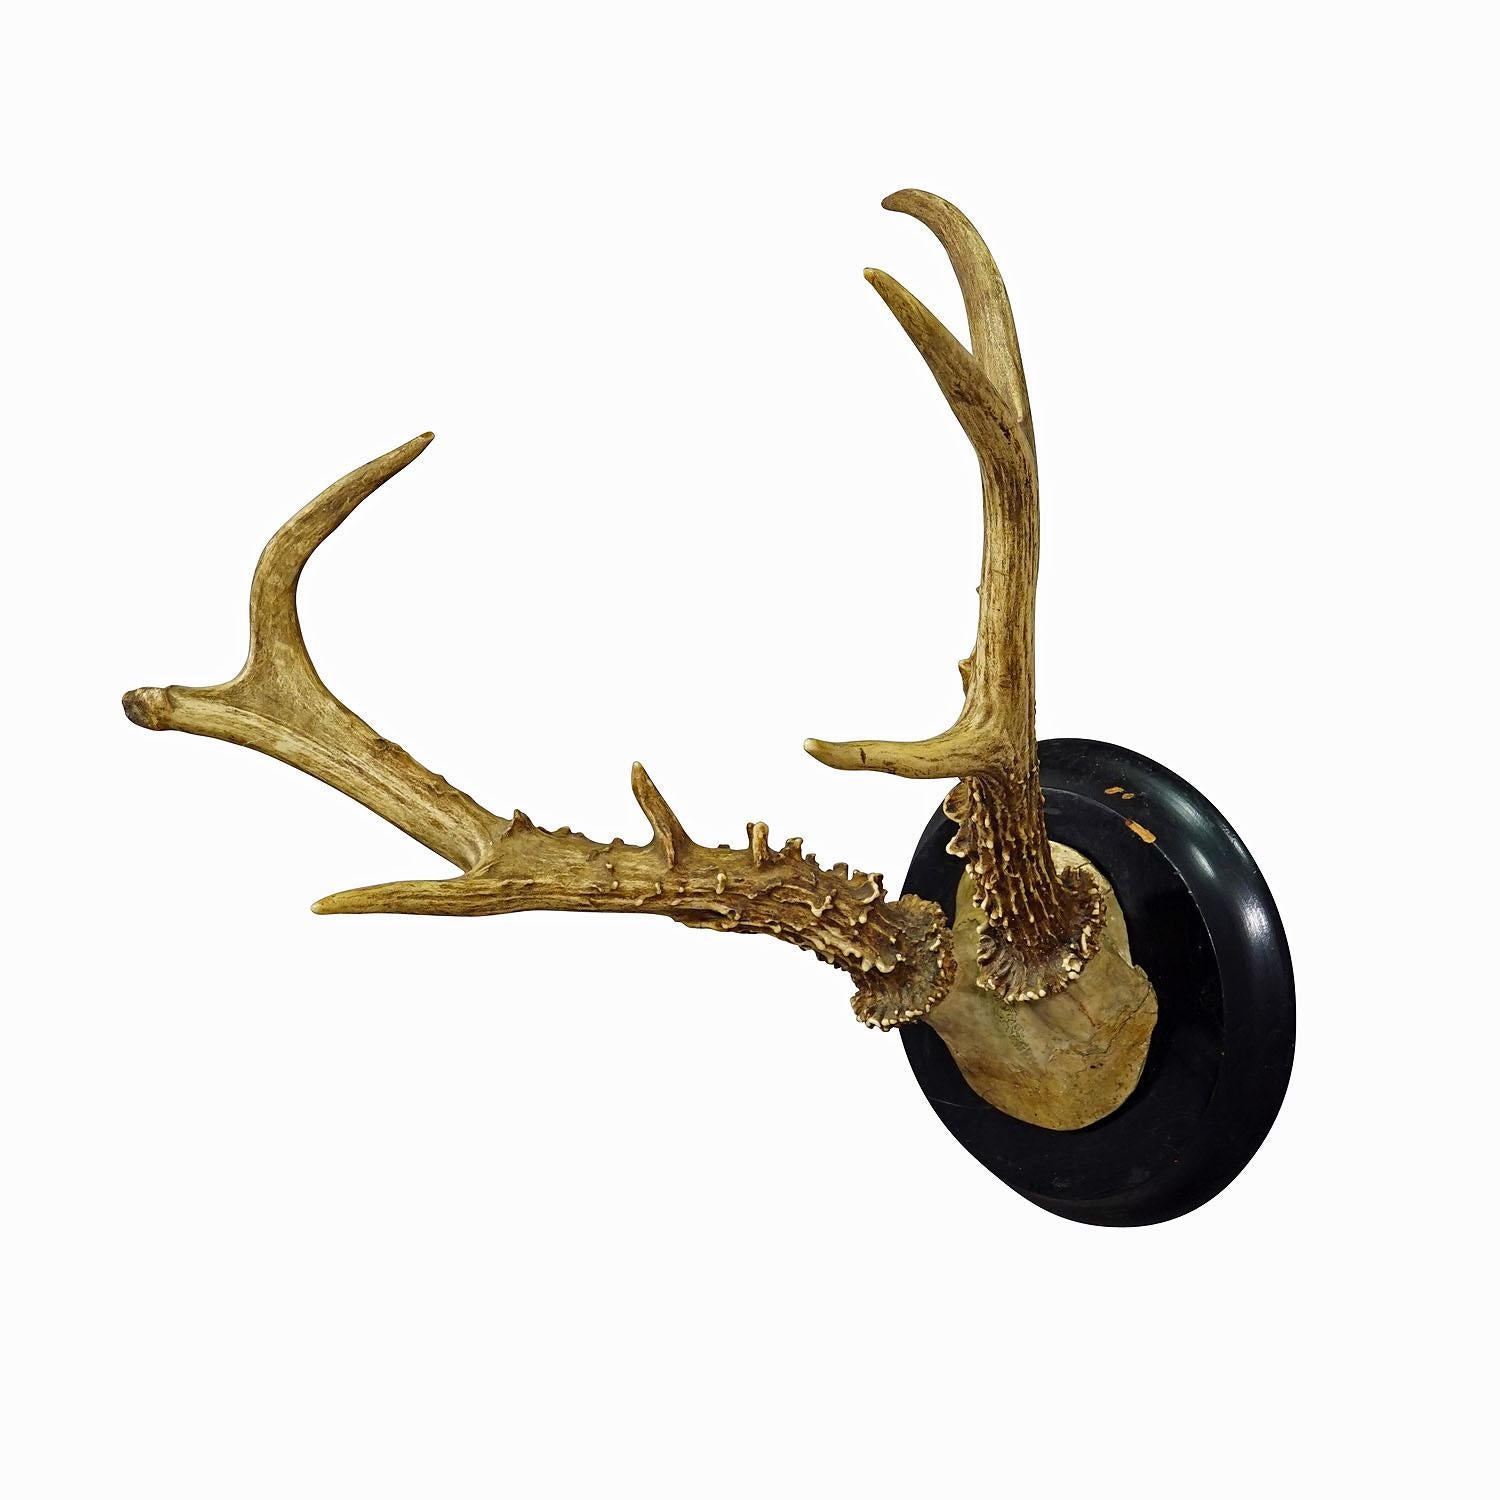 Abnorm Siberian Deer Trophy Mount on Wooden Plaque ca. 1900s
Item e6941
A large abnorm Siberian deer (Capreolus pygargus) trophy on a wooden turned plaque with black finish. The trophy was shot in the late 19th century. 

Trophies are mementos from